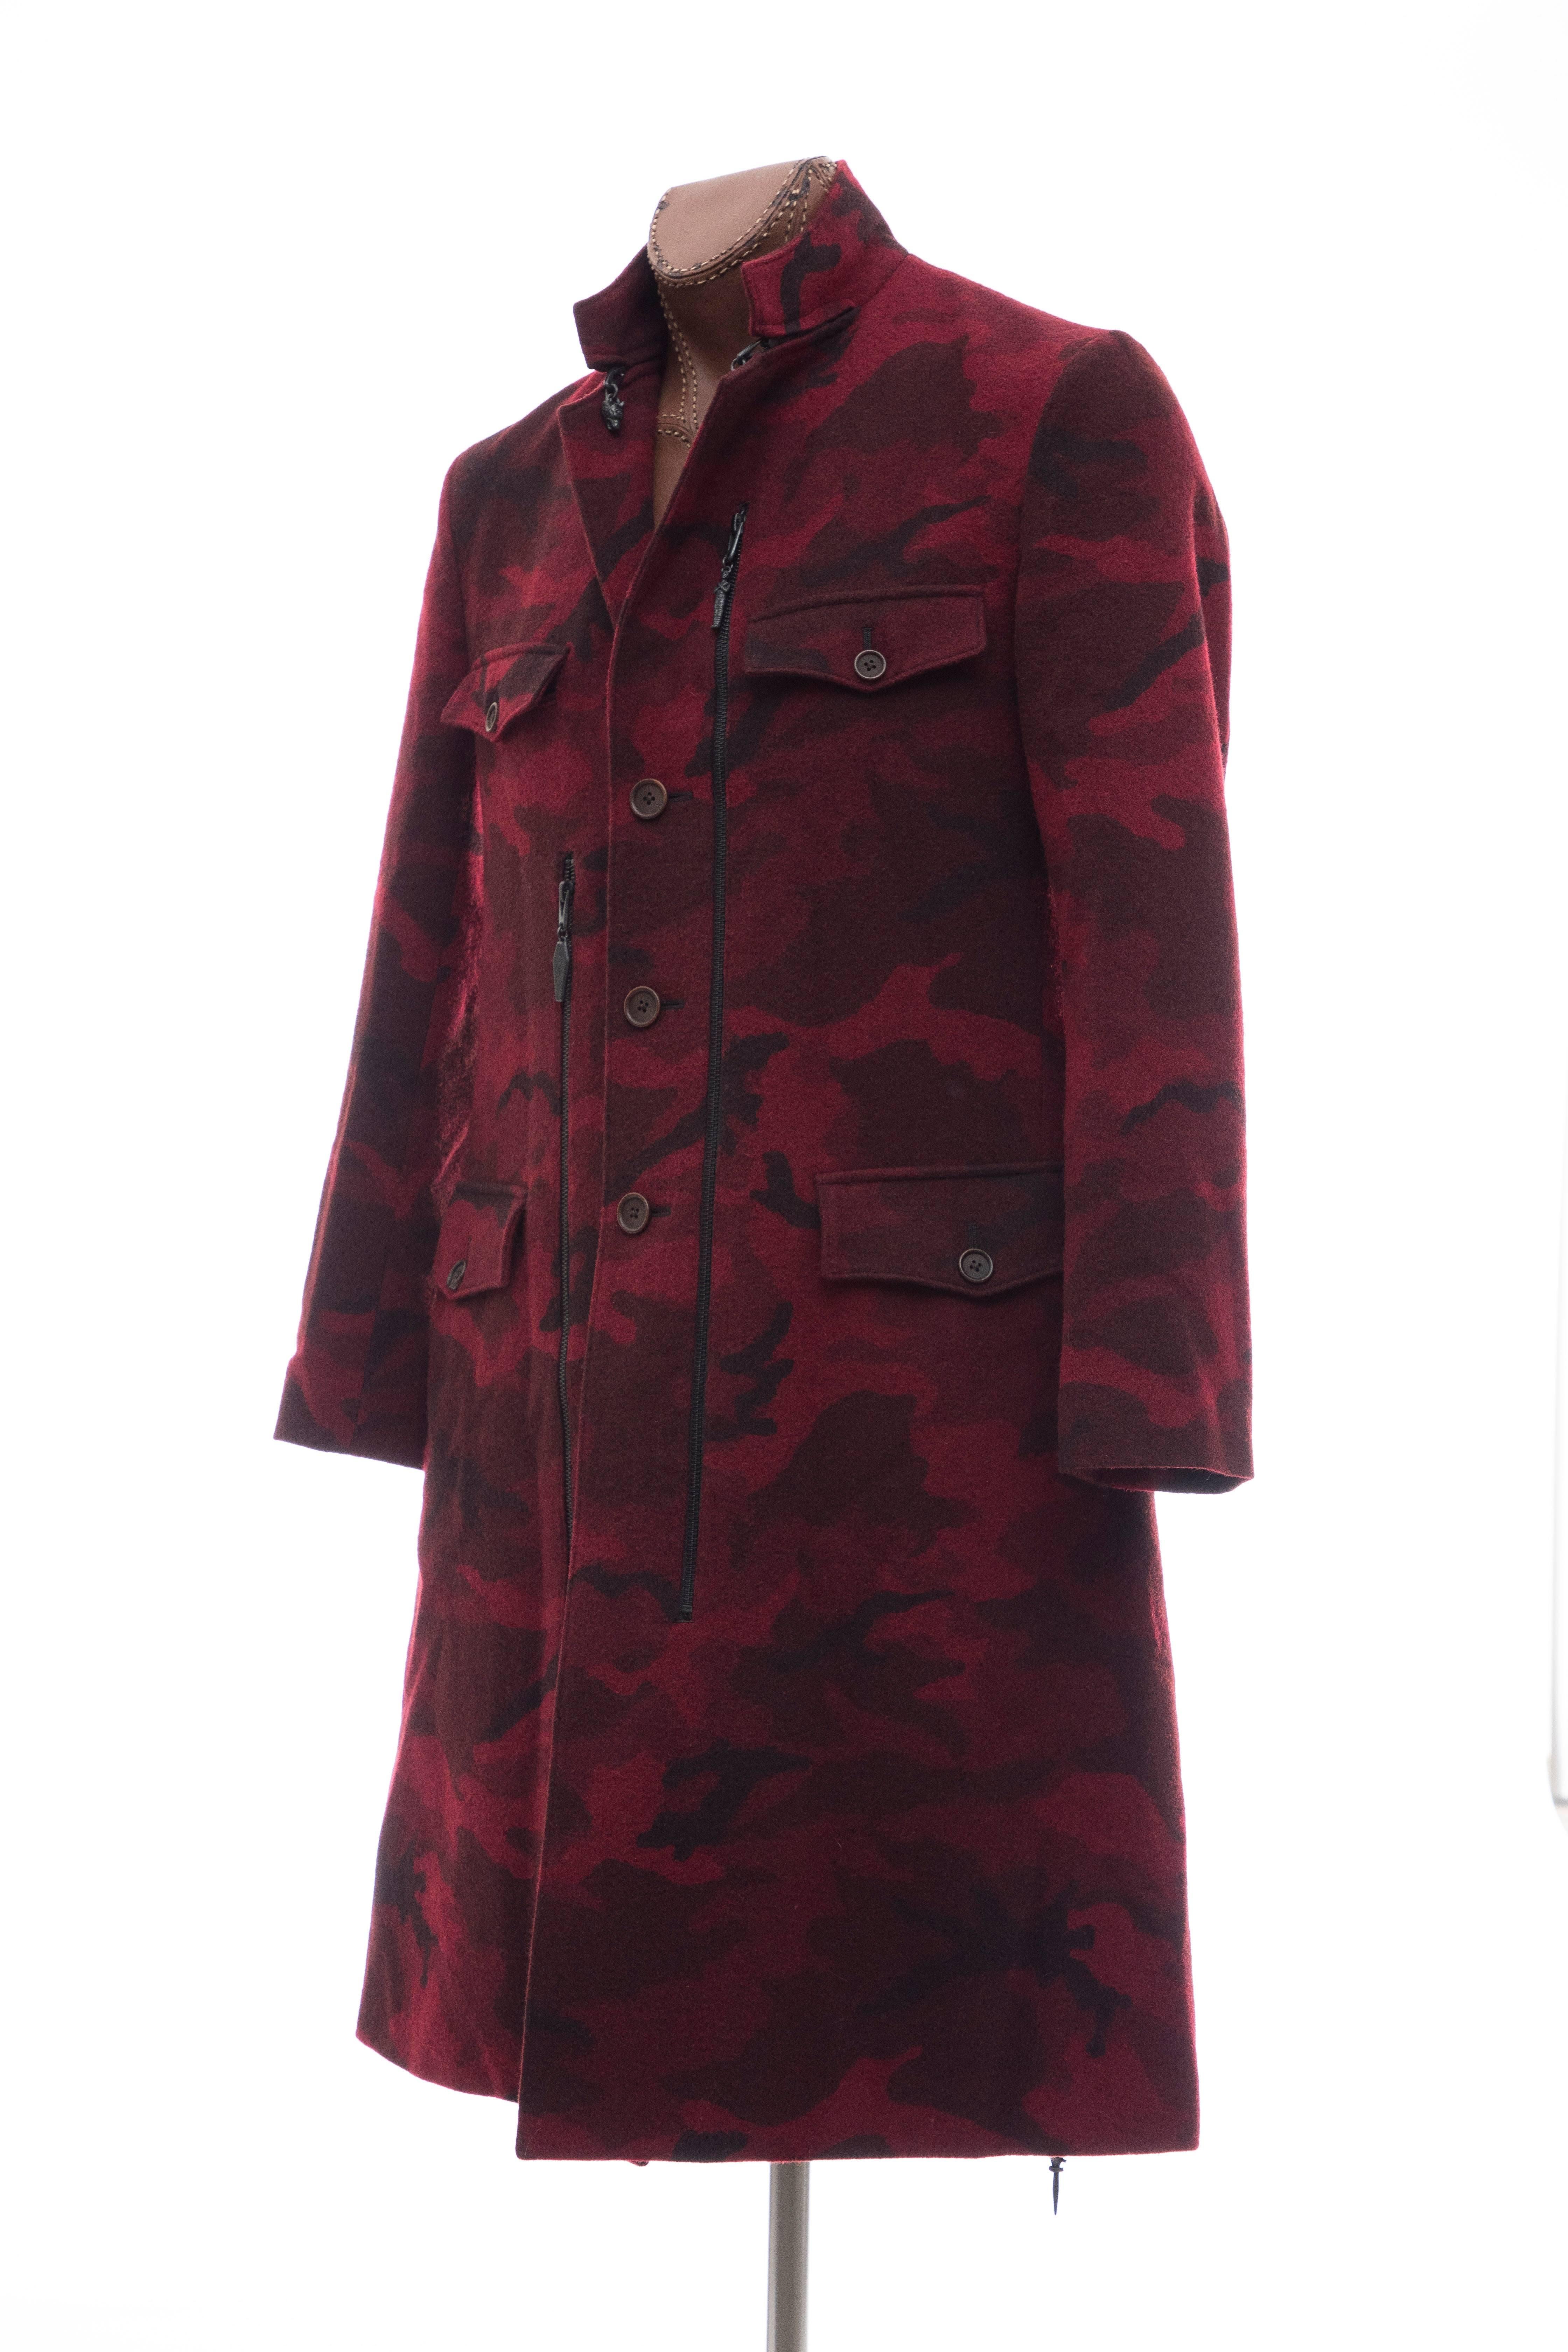 Yohji Yamamoto Pour Homme Wool Camouflage Chesterfield Coat, Fall 2014 For Sale 3